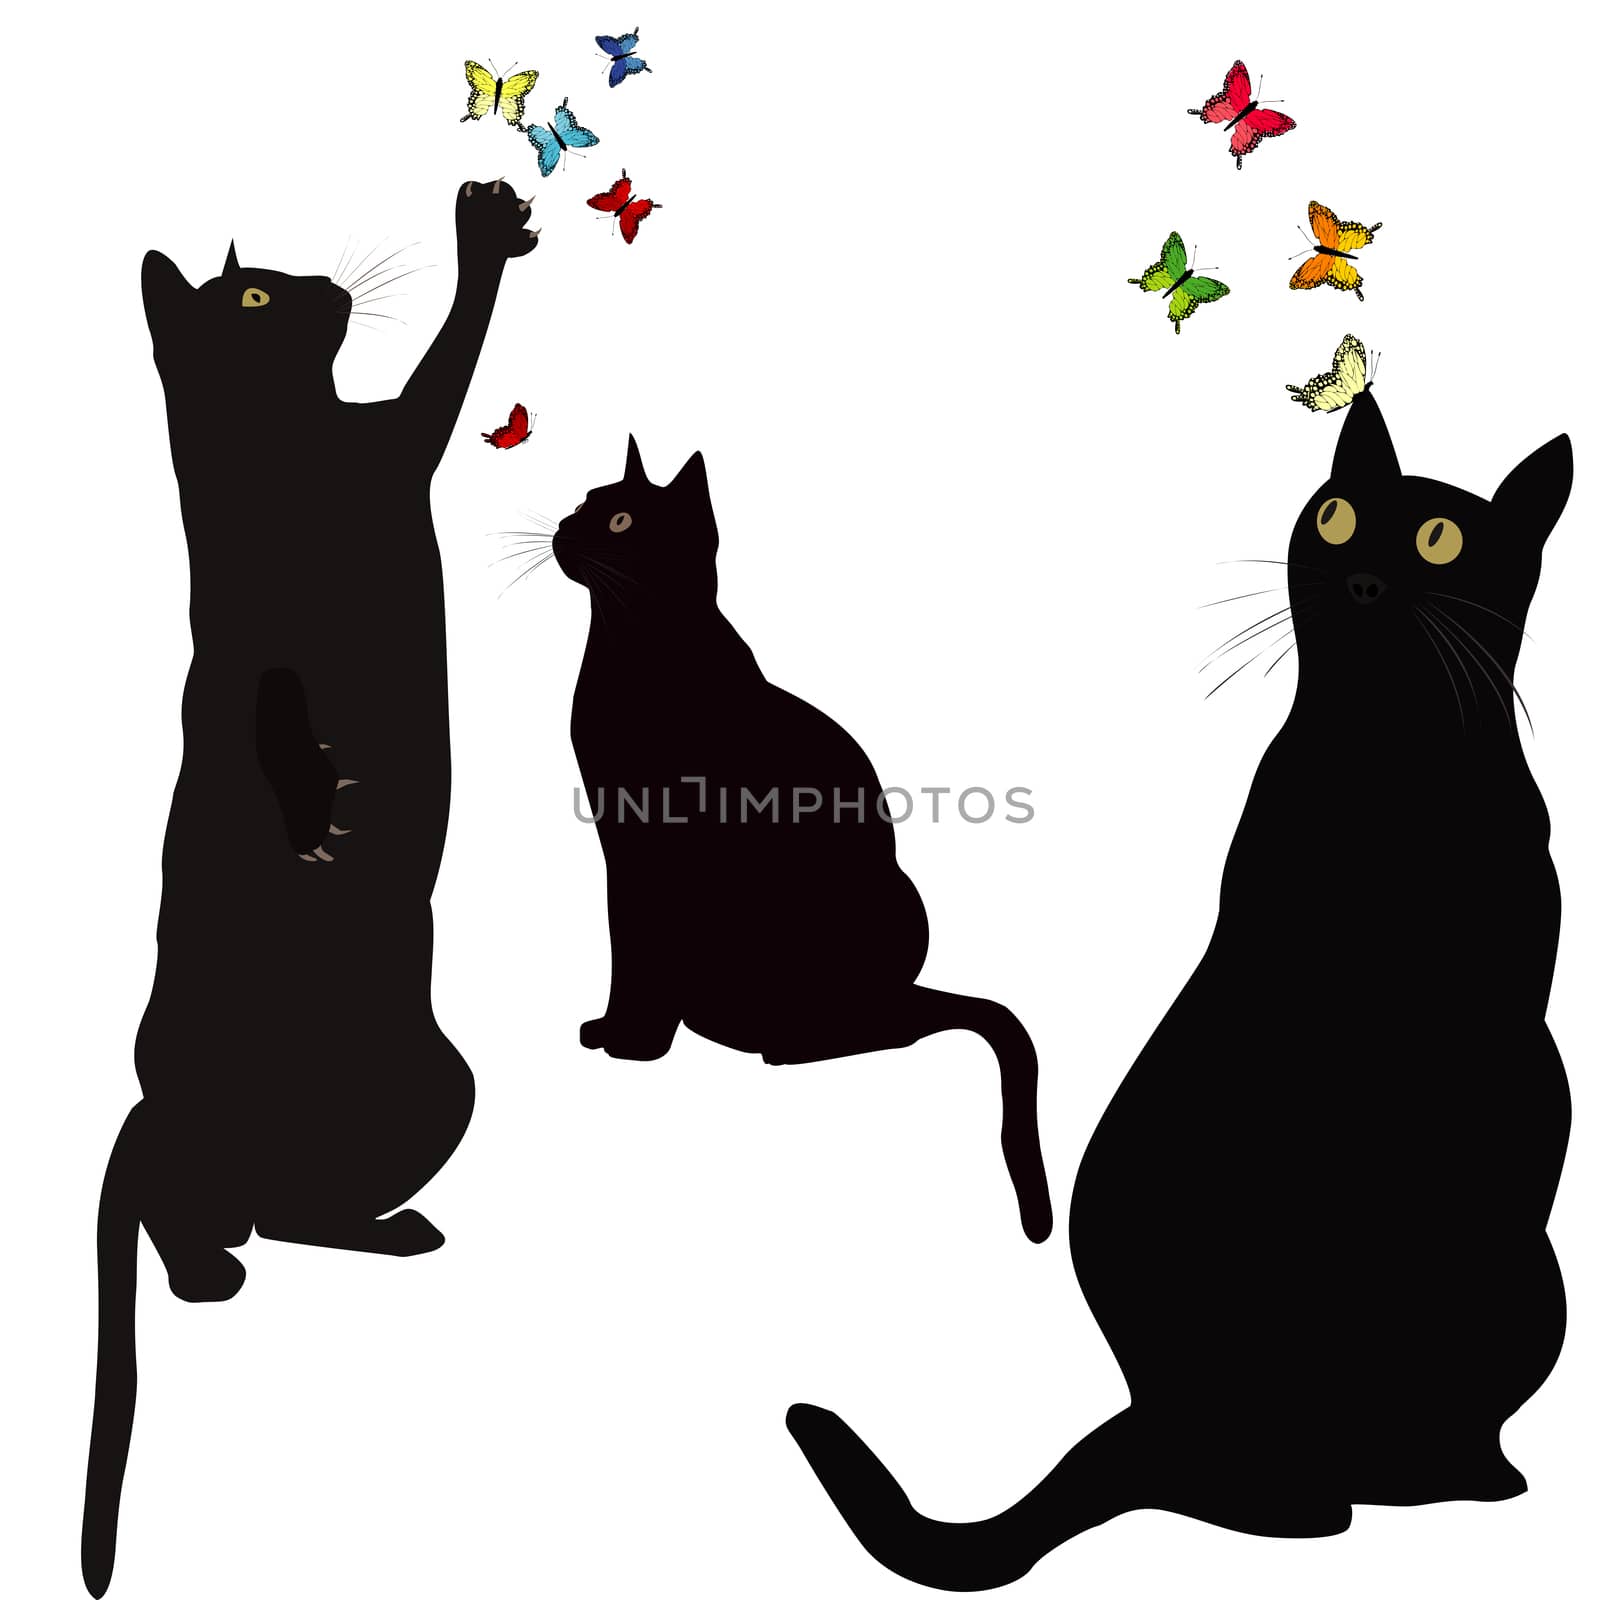 Black cats silhouettes and colorful butterlies by hibrida13